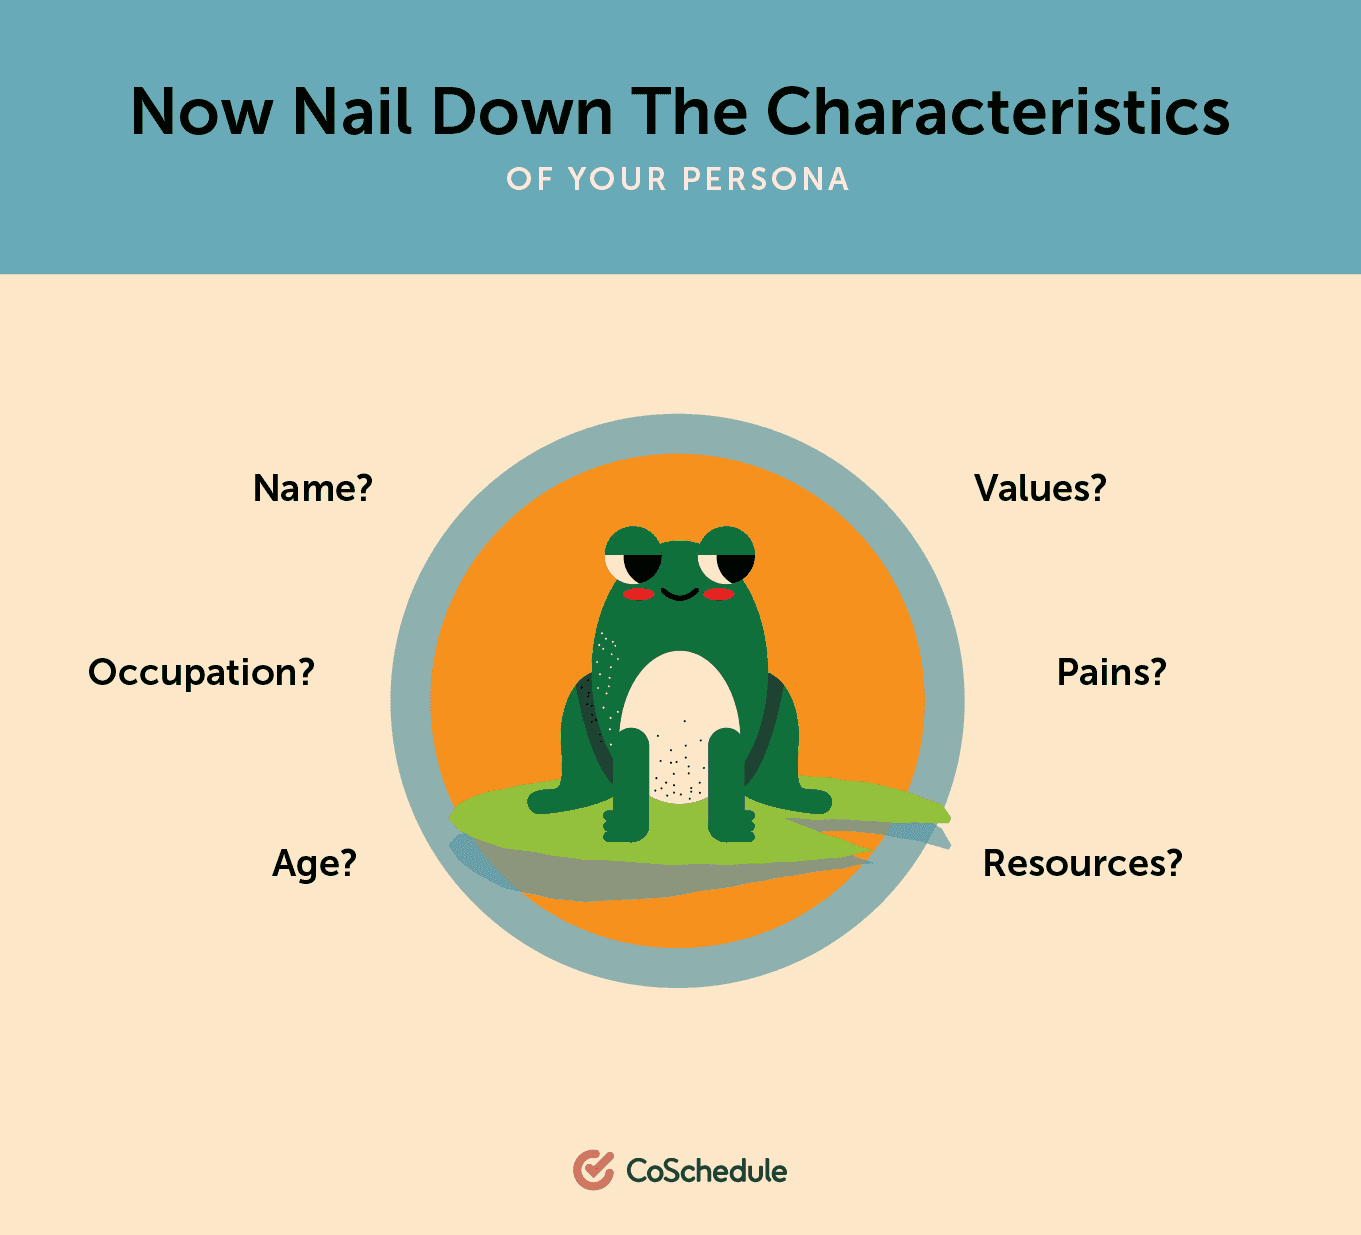 Nail down the characteristics of your persona